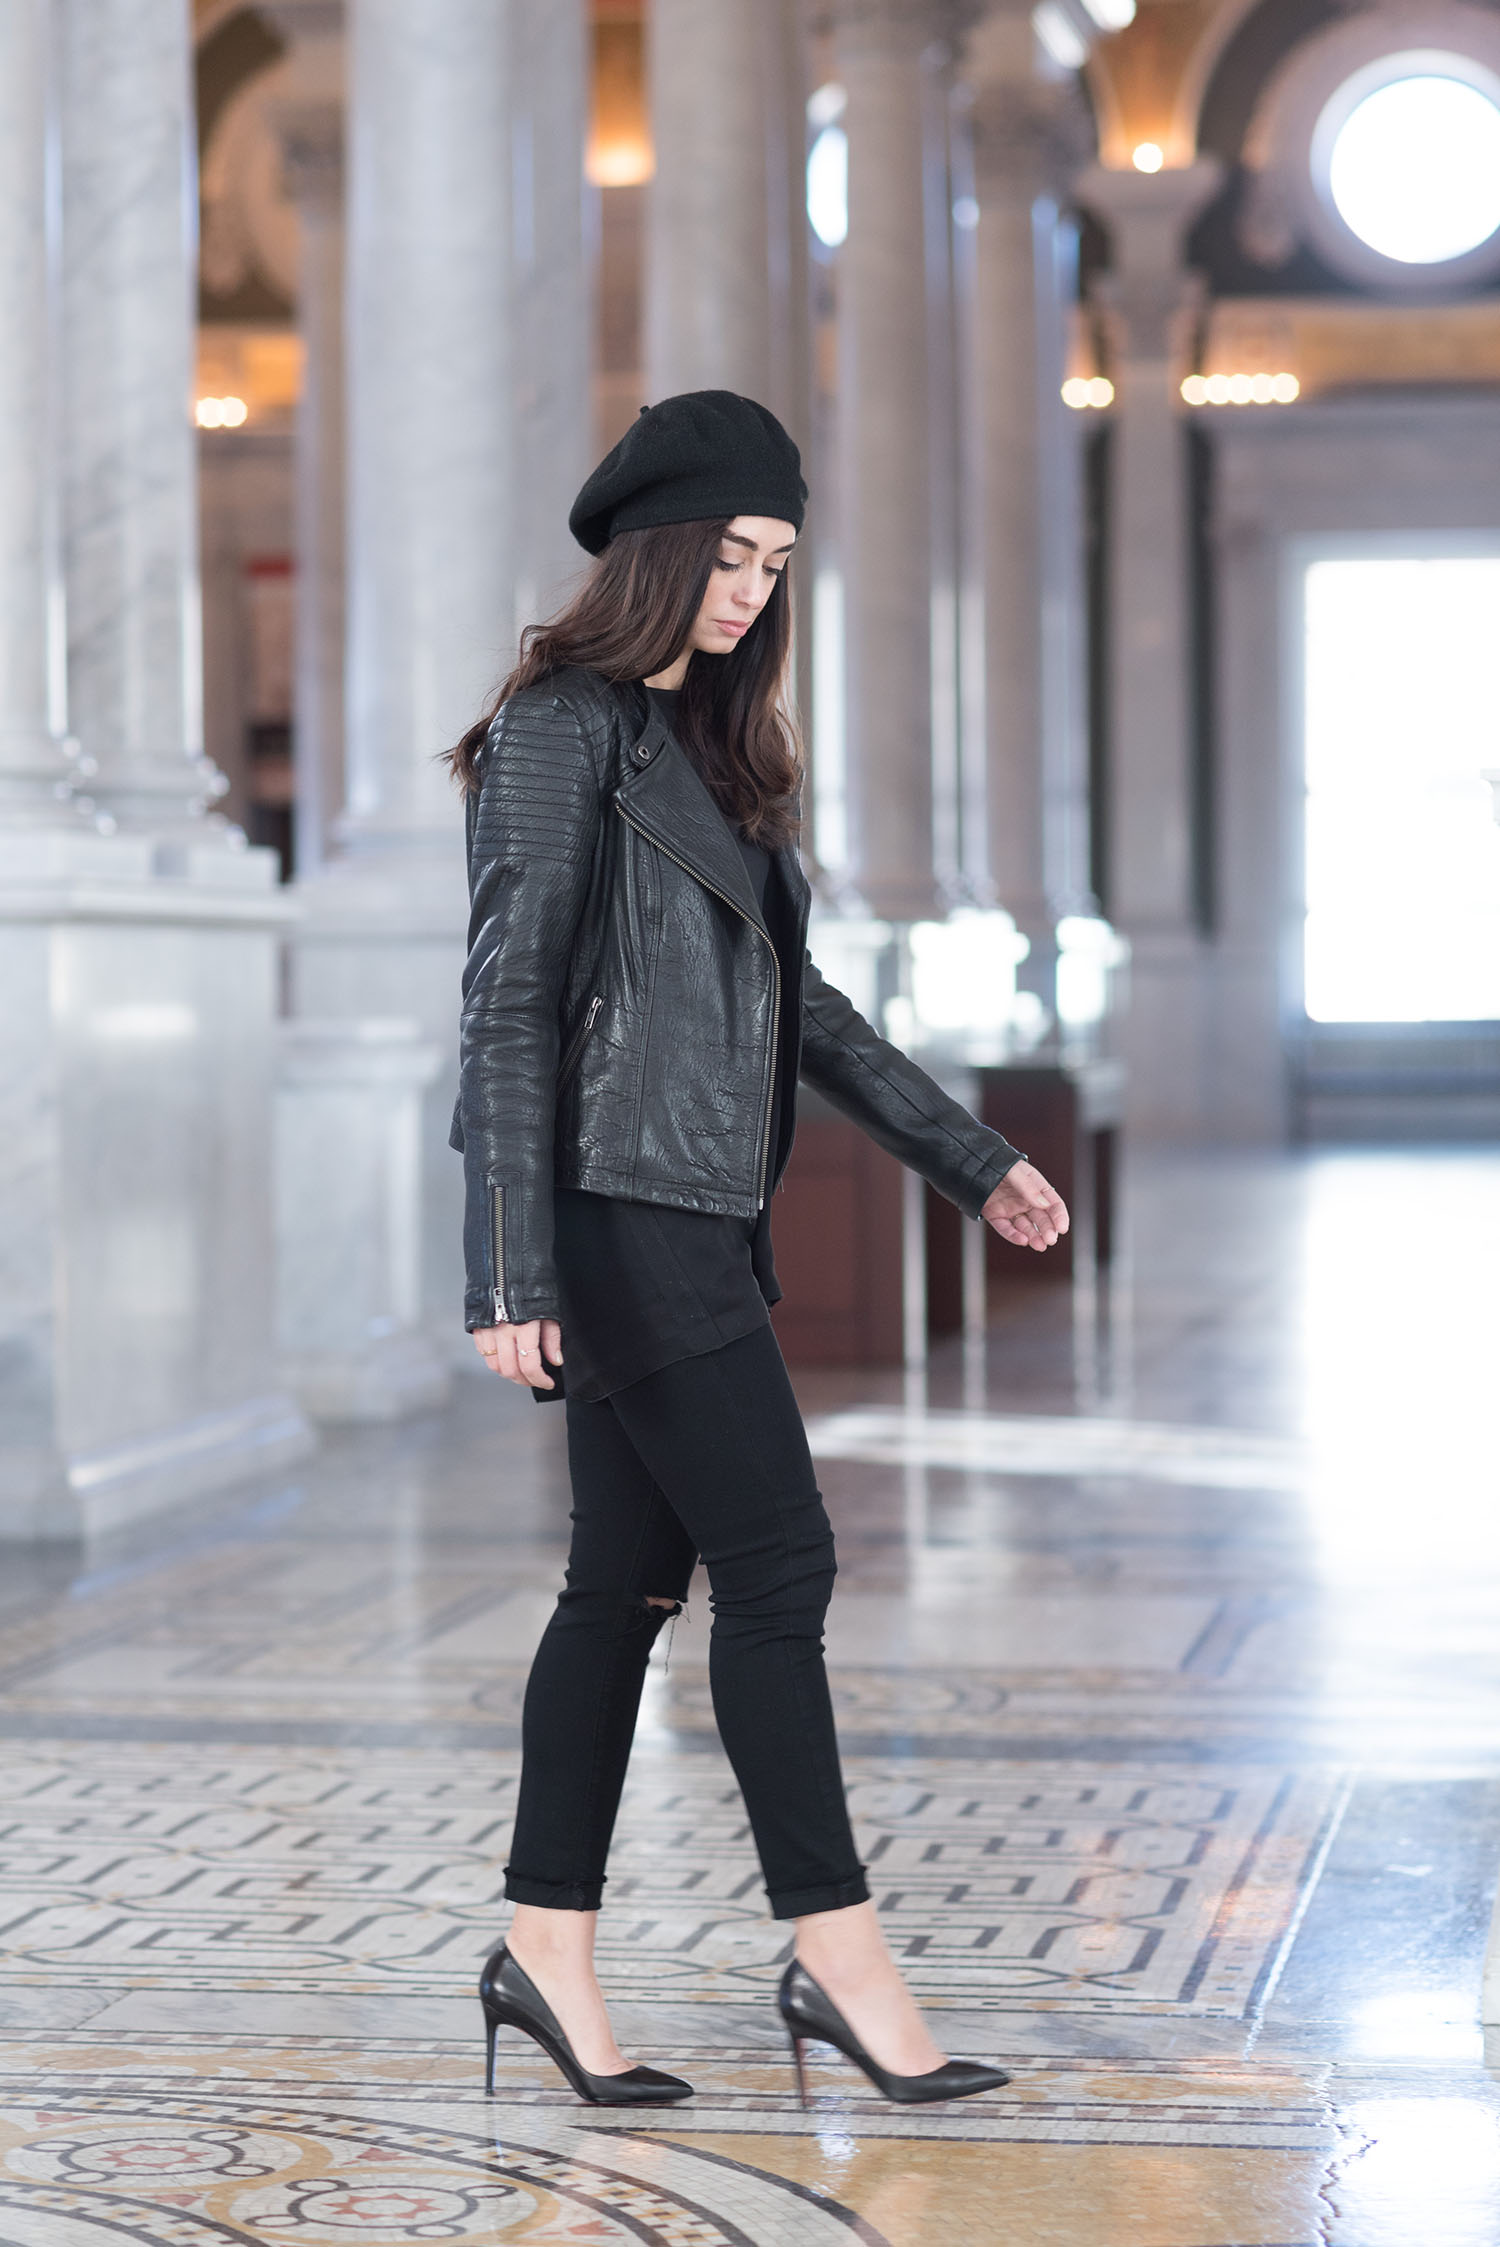 Winnipeg fashion blogger Cee Fardoe of Coco & Vera at the Library of Congress in Washington DC, wearing Paige jeans and Christian Louboutin Pigalle pumps